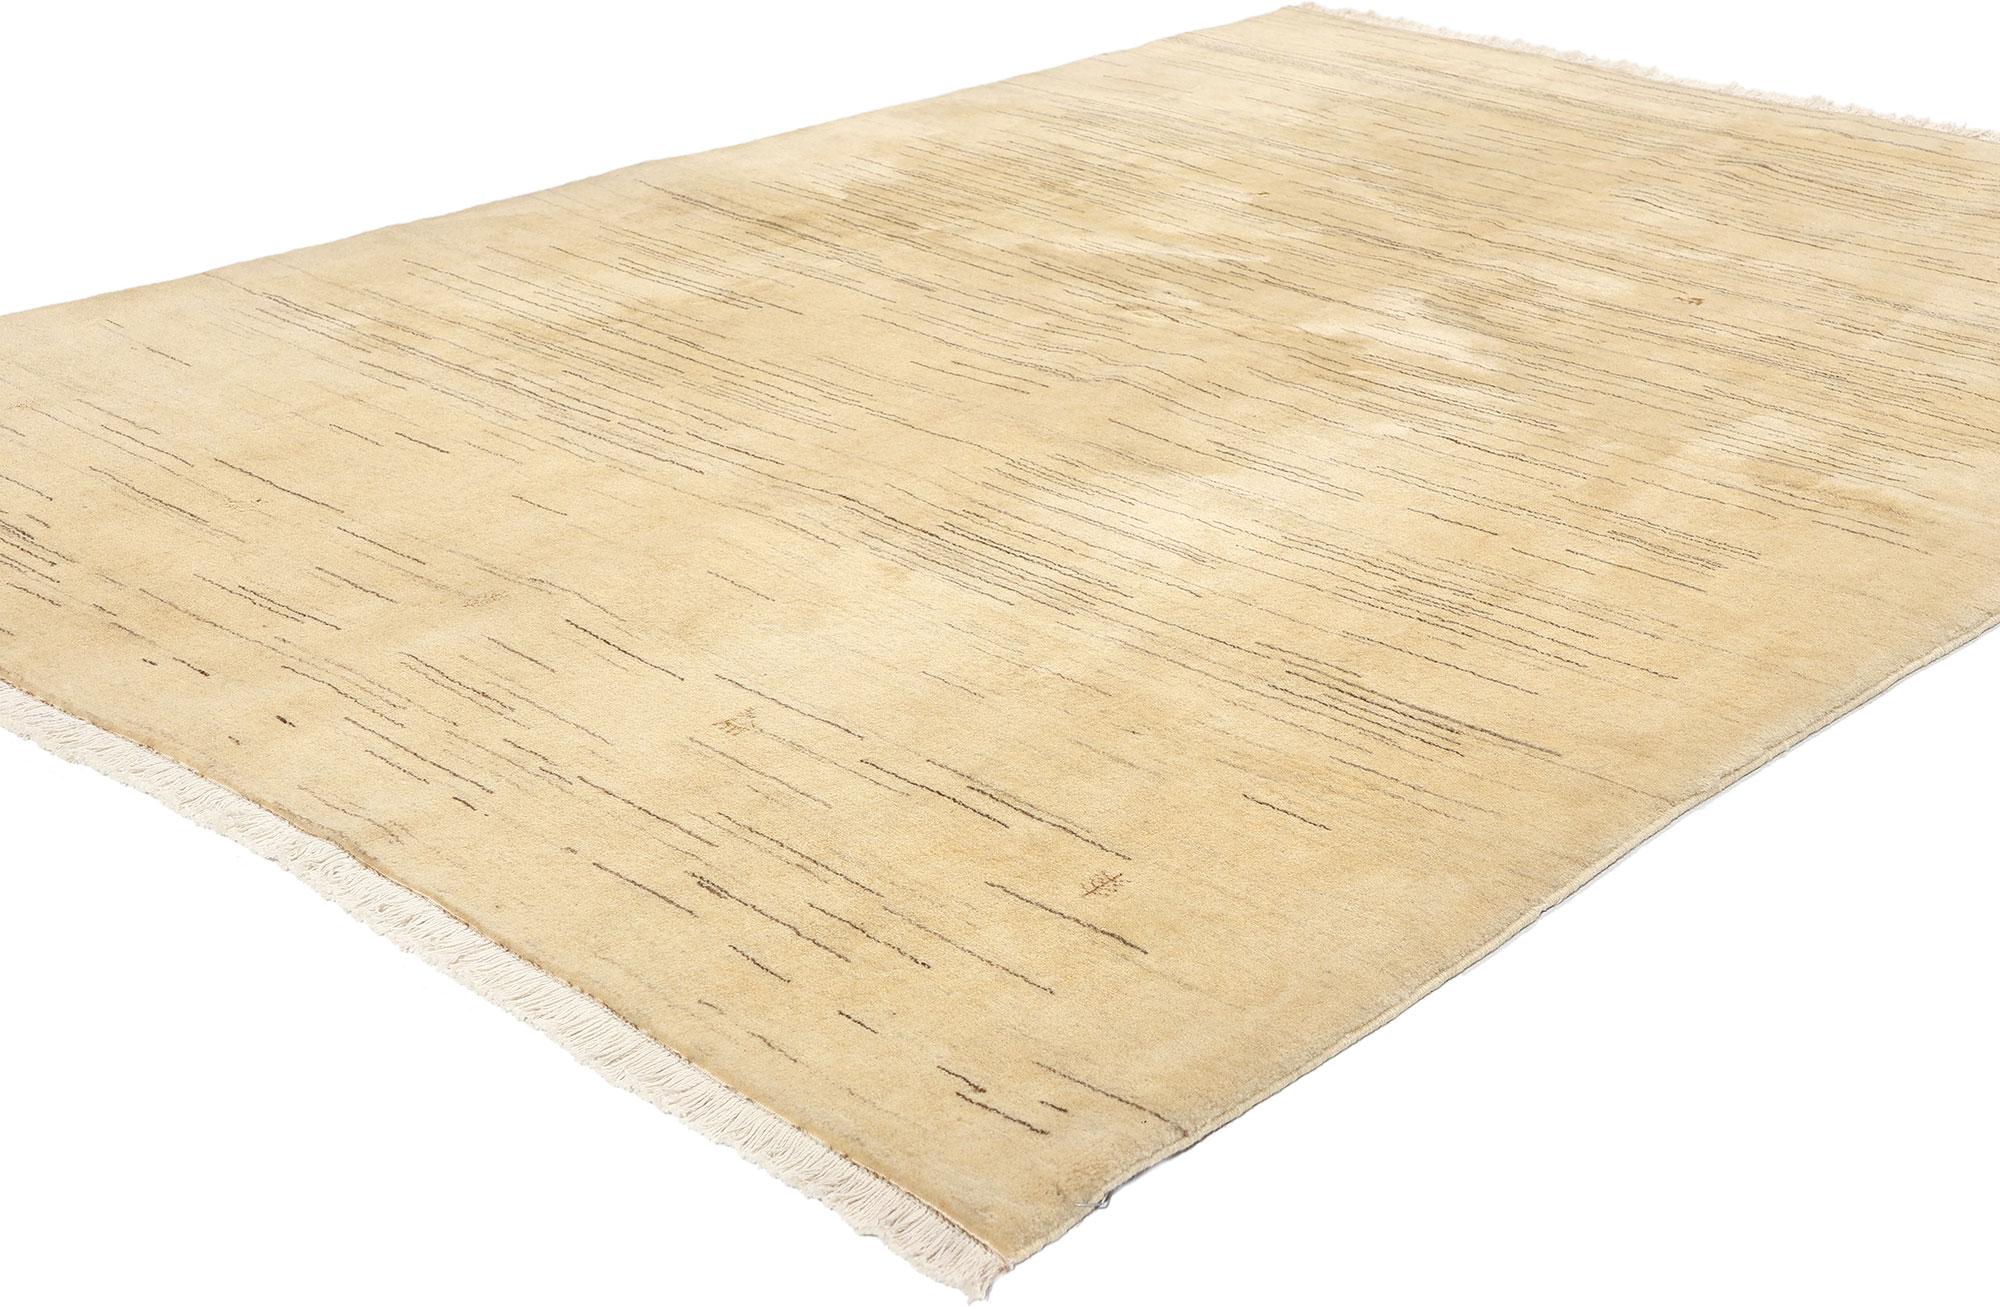 61169 Vintage Persian Gabbeh Rug, 05'02 x 07'06. Neutral Persian Gabbeh rugs are a type of traditional Persian rug known for their simplicity, thick pile, and muted color palette, typically featuring earthy tones like beige, cream, brown, and gray.